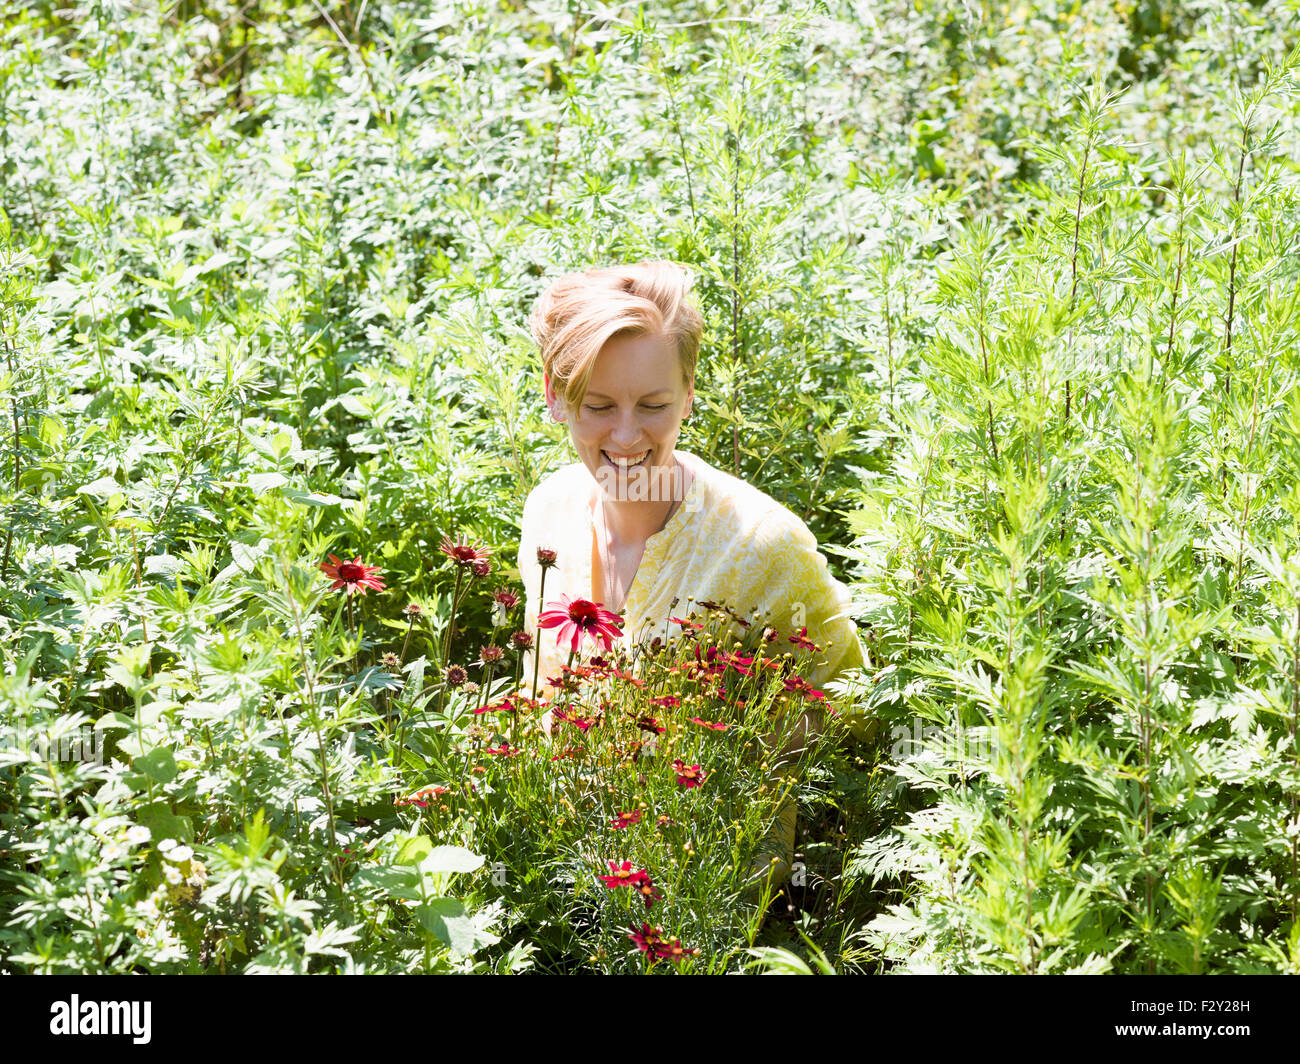 A young woman standing in a perennials bed surrounded by plants and flowers at a plant nursery. Stock Photo